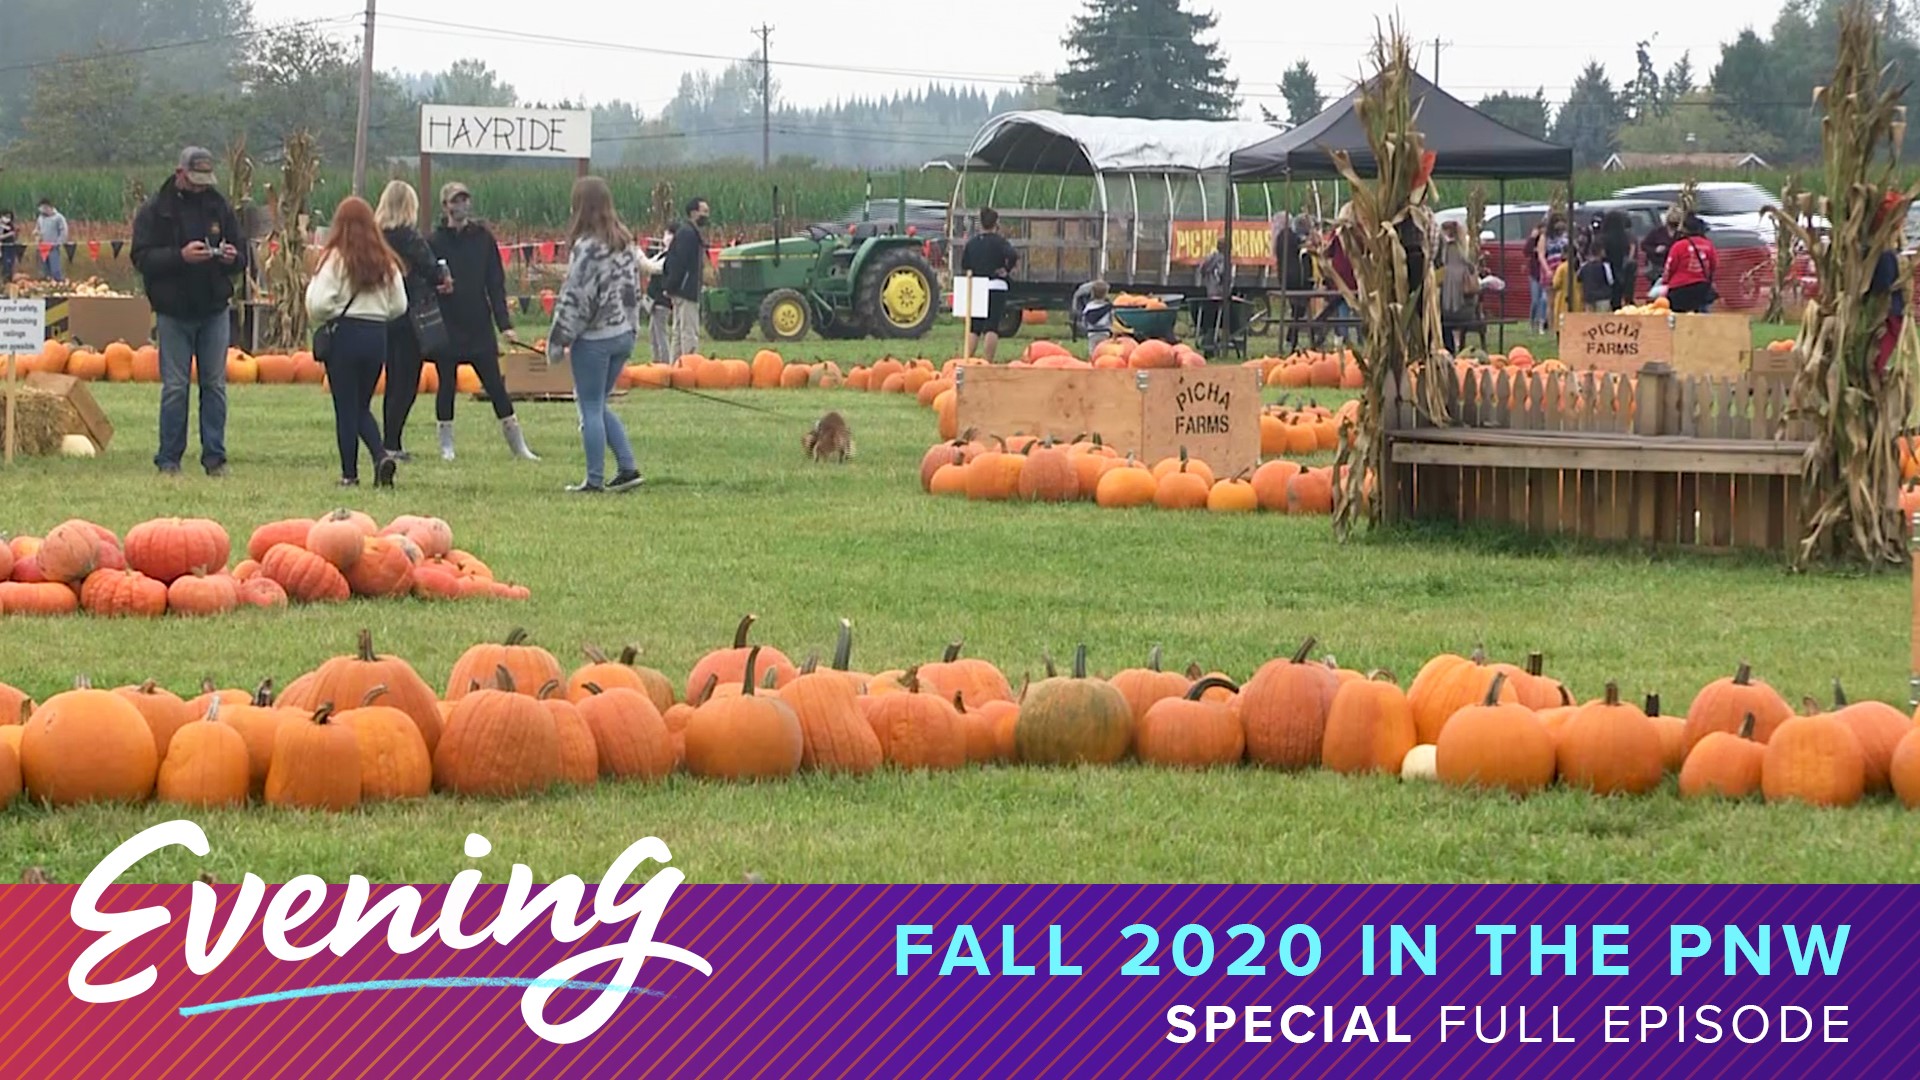 Fall is full of changing leaves, pumpkins, cozy flicks and more -- here are our top picks on where to go and what to do to celebrate the season safely!